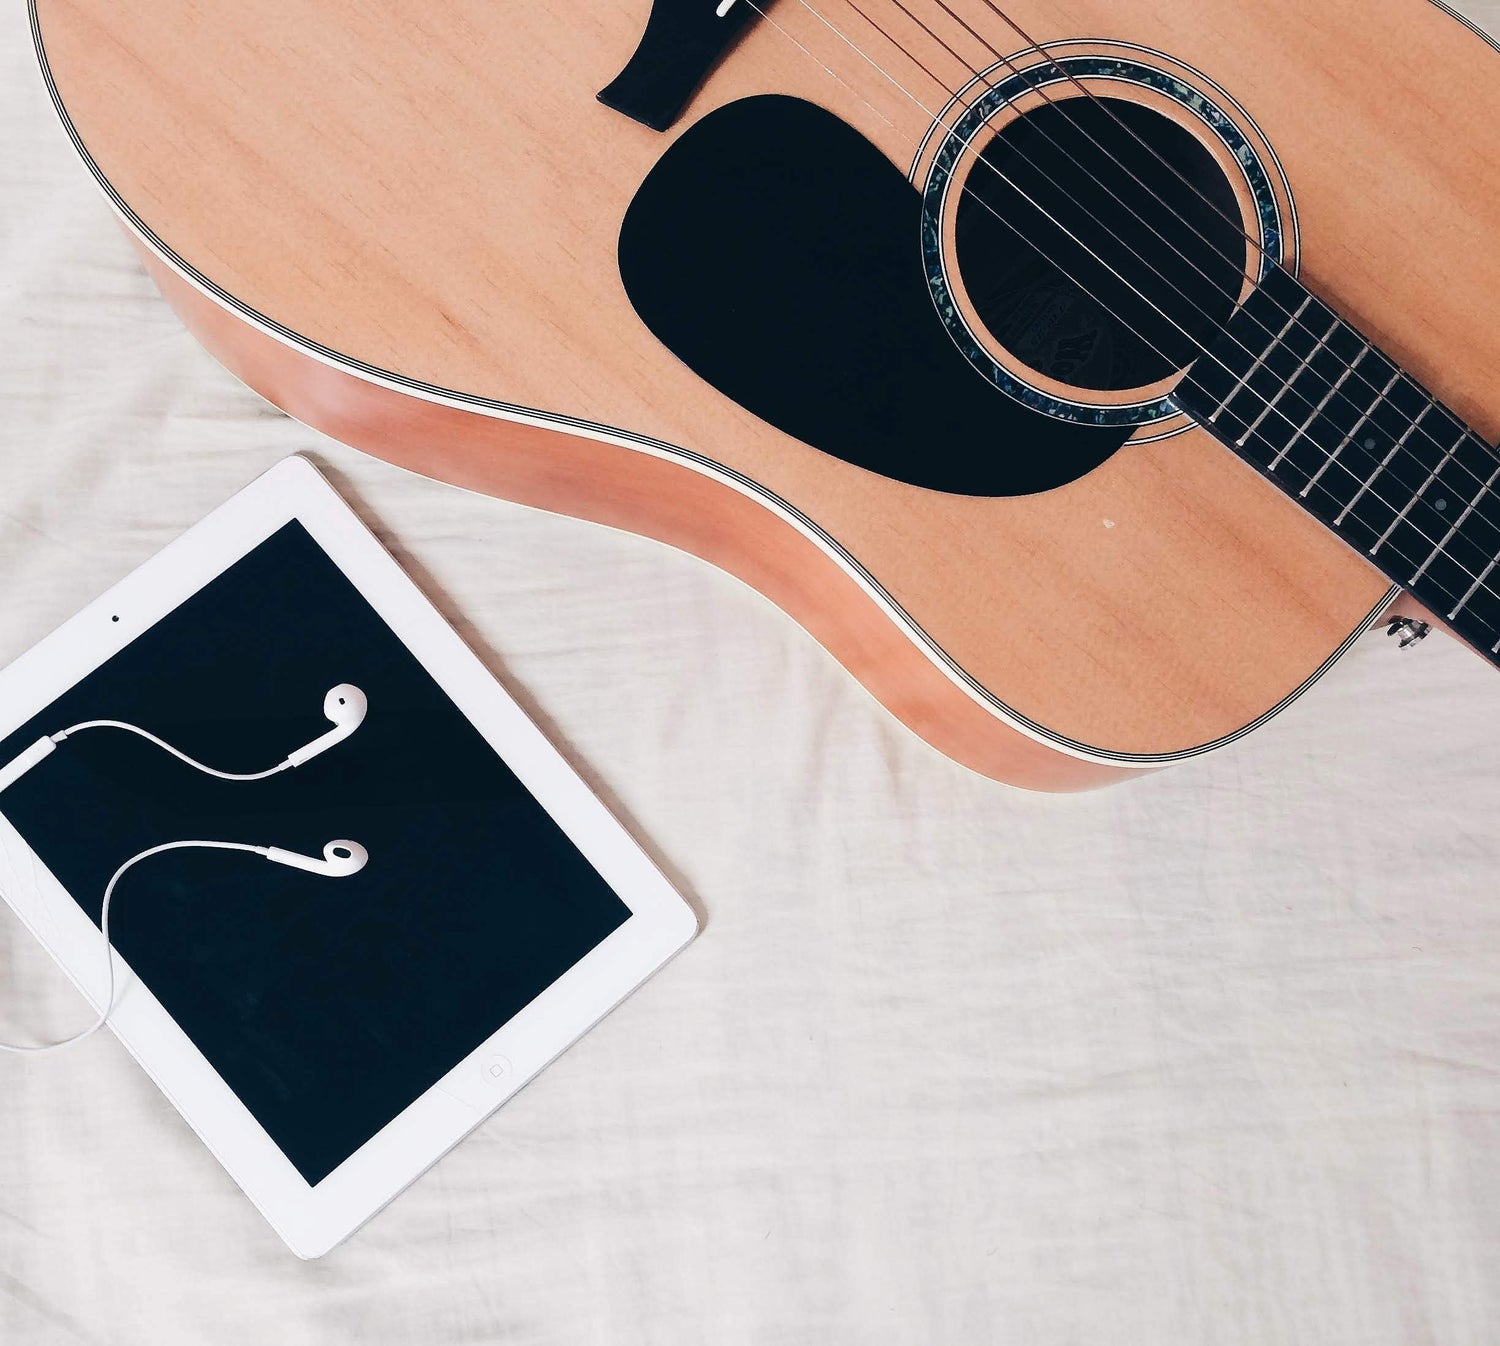 5 Handy Apps for Guitarists in 2022